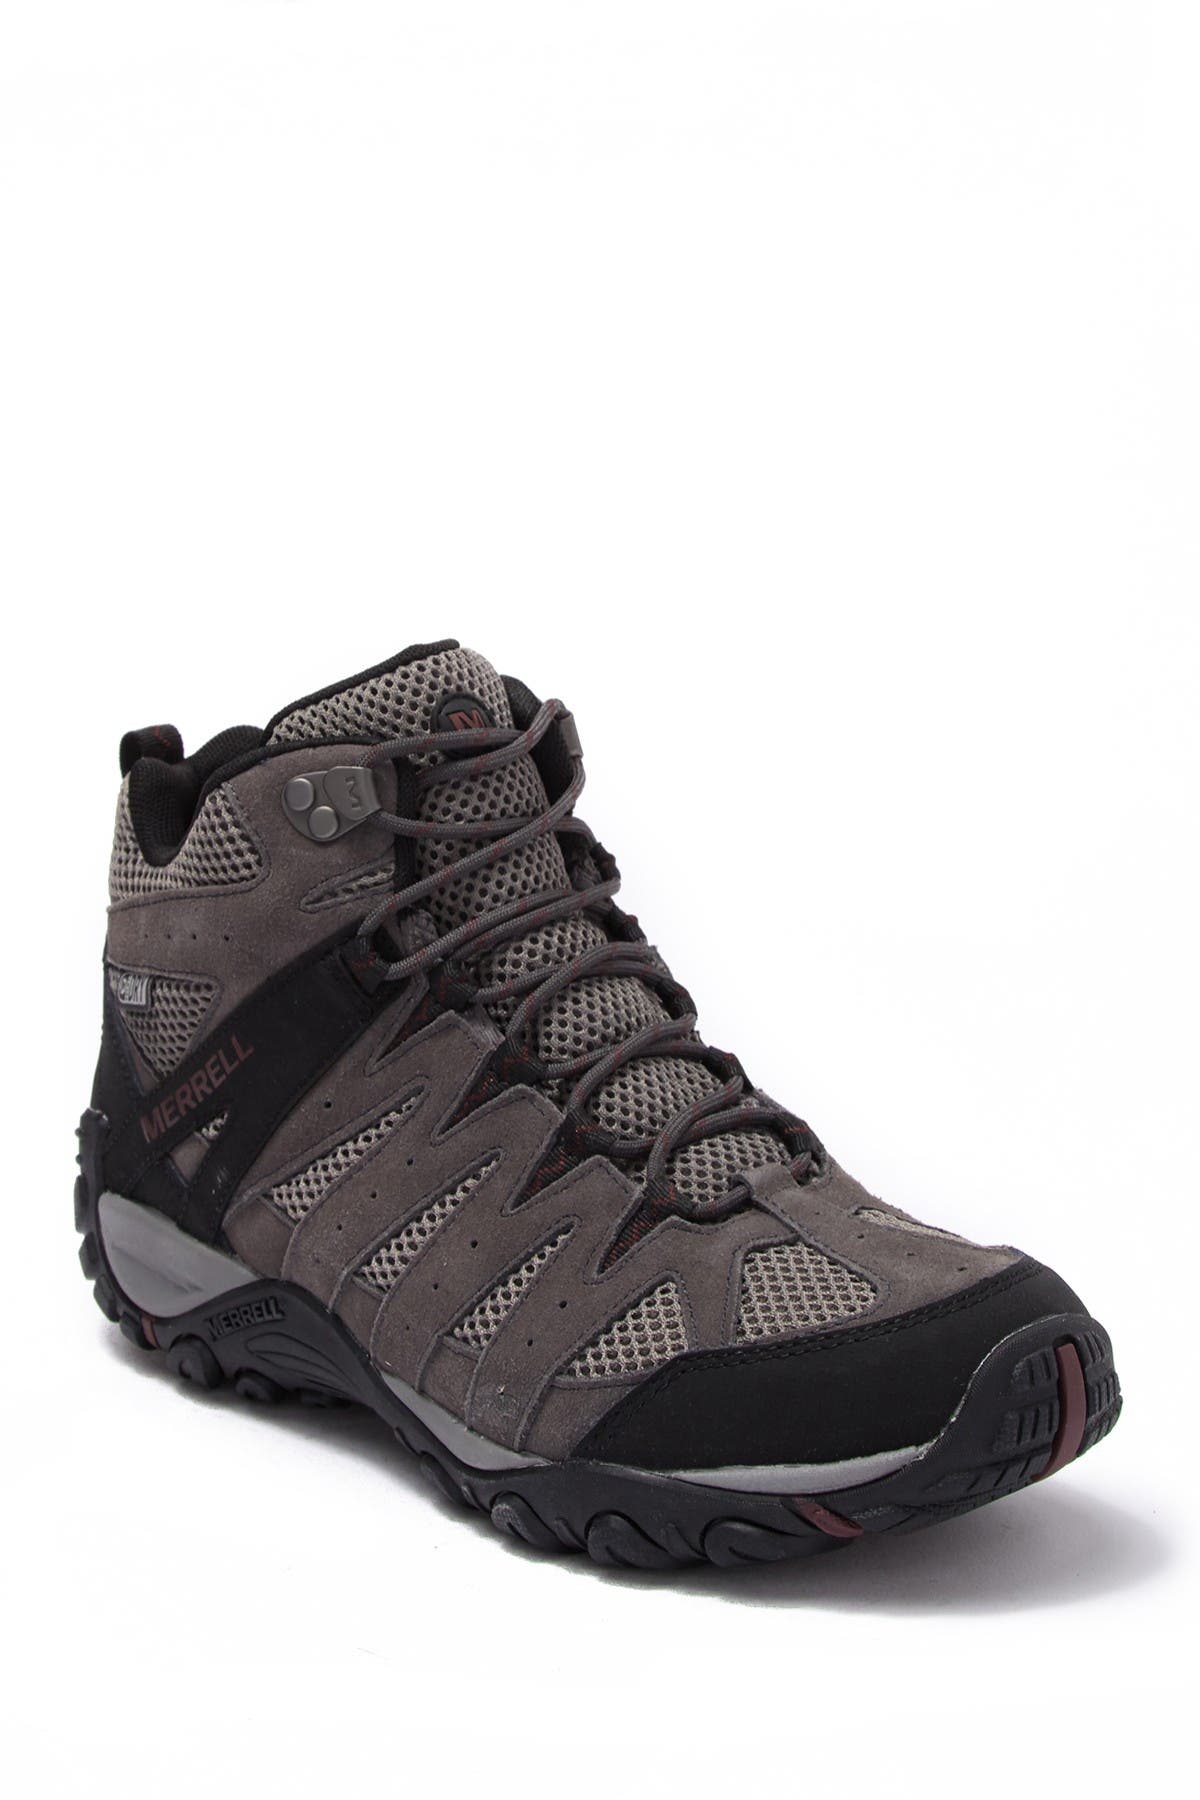 merrell accentor 2 vent review